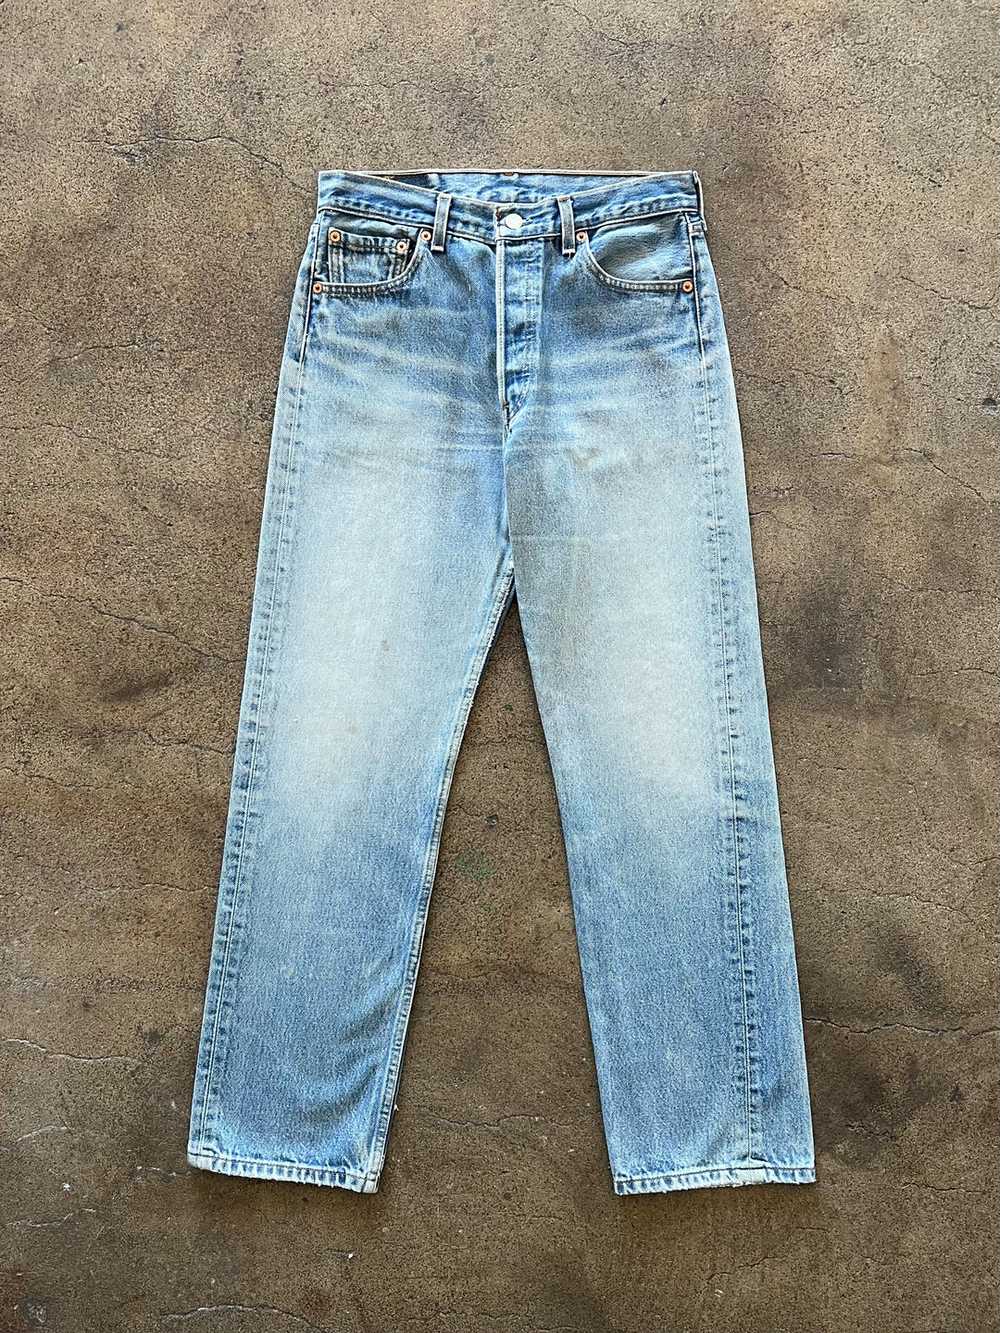 2000s Levi's 501 Jeans Faded 29" x 29" - image 1